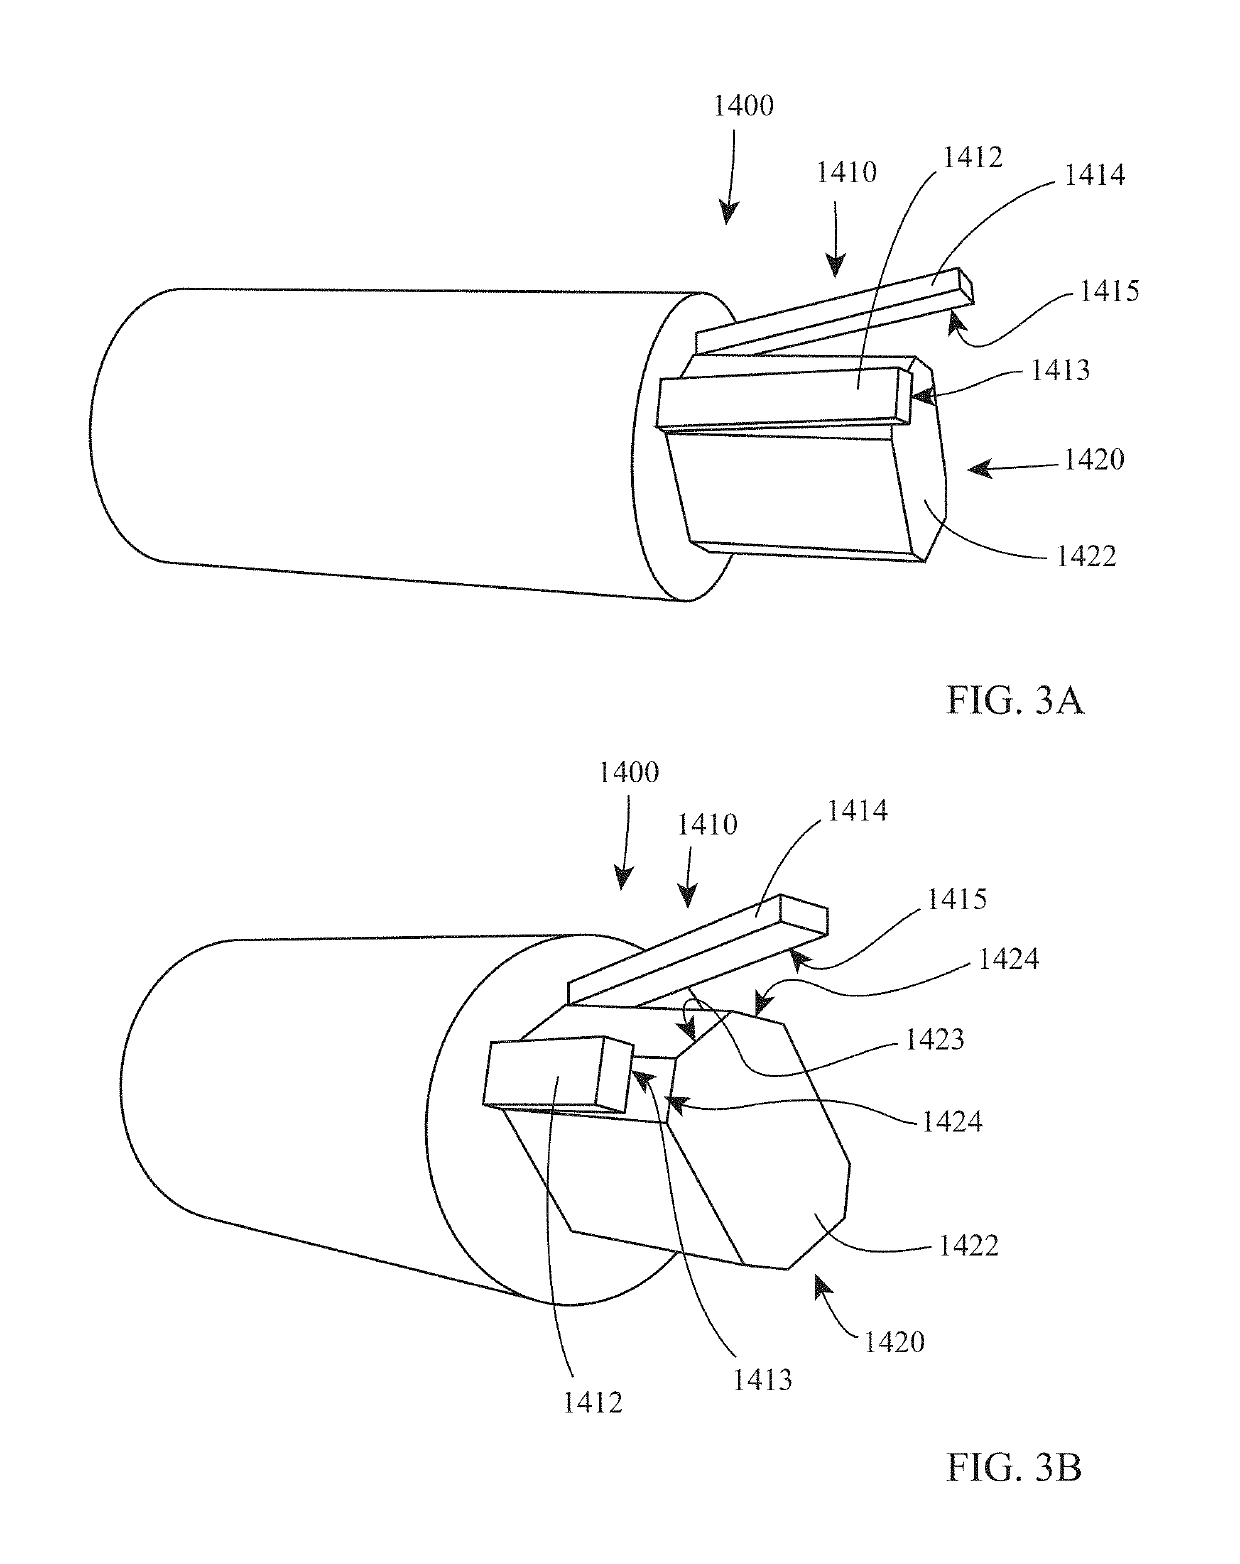 Surgical instruments incorporating ultrasonic and electrosurgical functionality